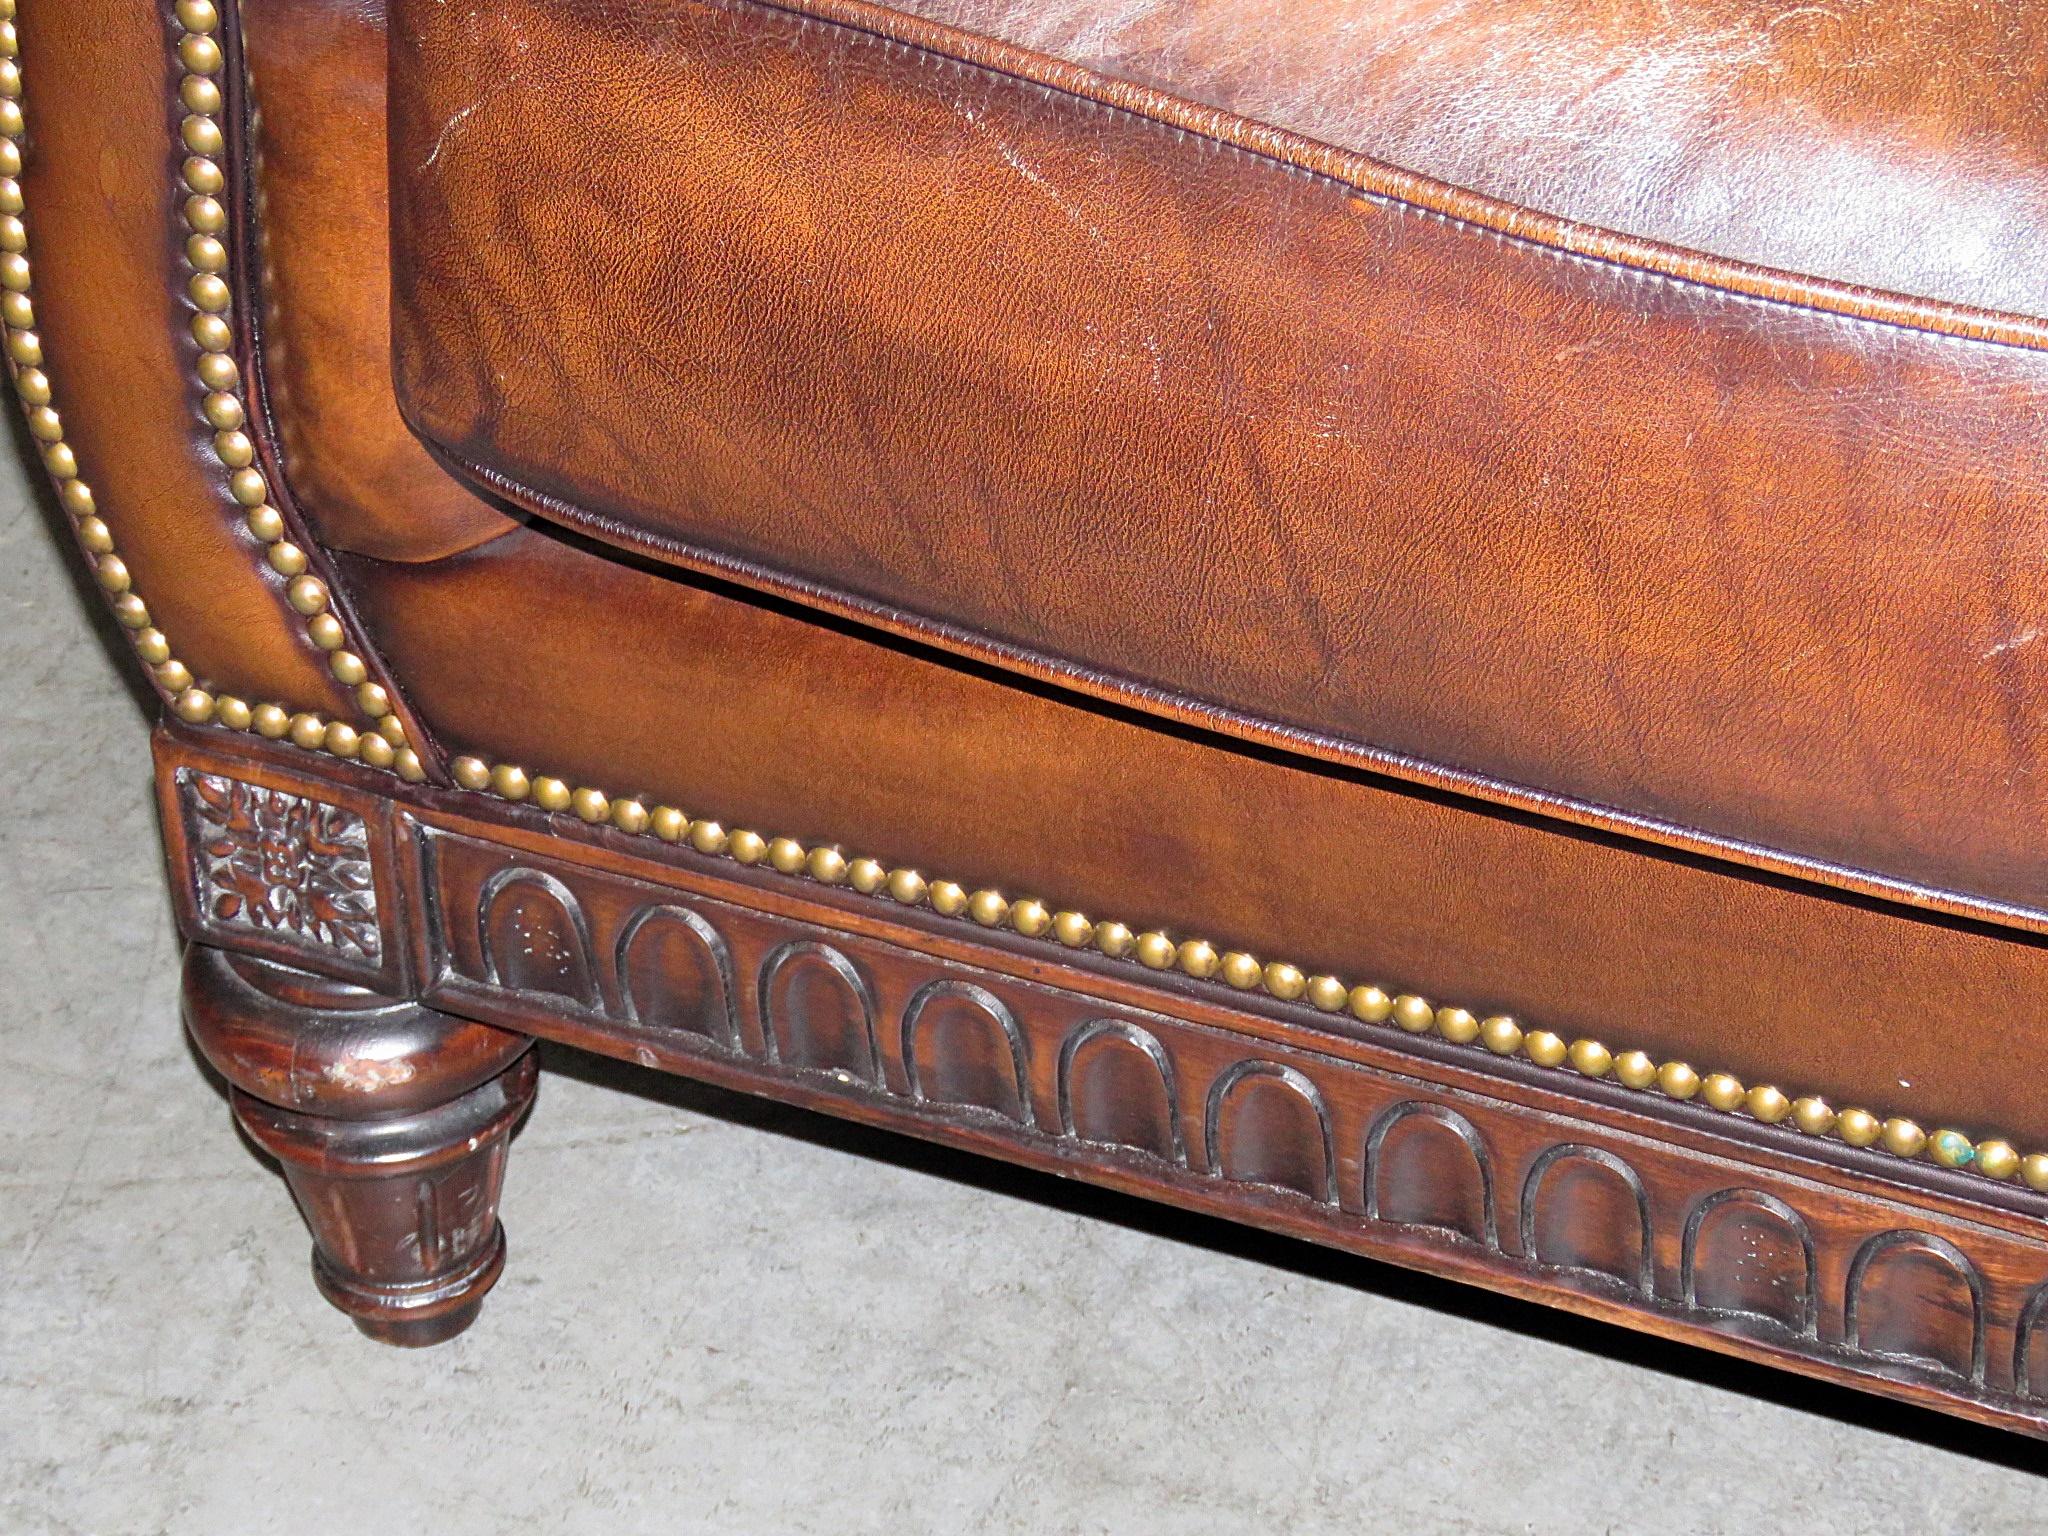 This is a rare form of chesterfield sofa. This one has a Louis XVI carved mahogany frame and not the English style frame with are more used to seeing. The genuine leather is in very good condition and has a classic tobacco hue with an angtiqued